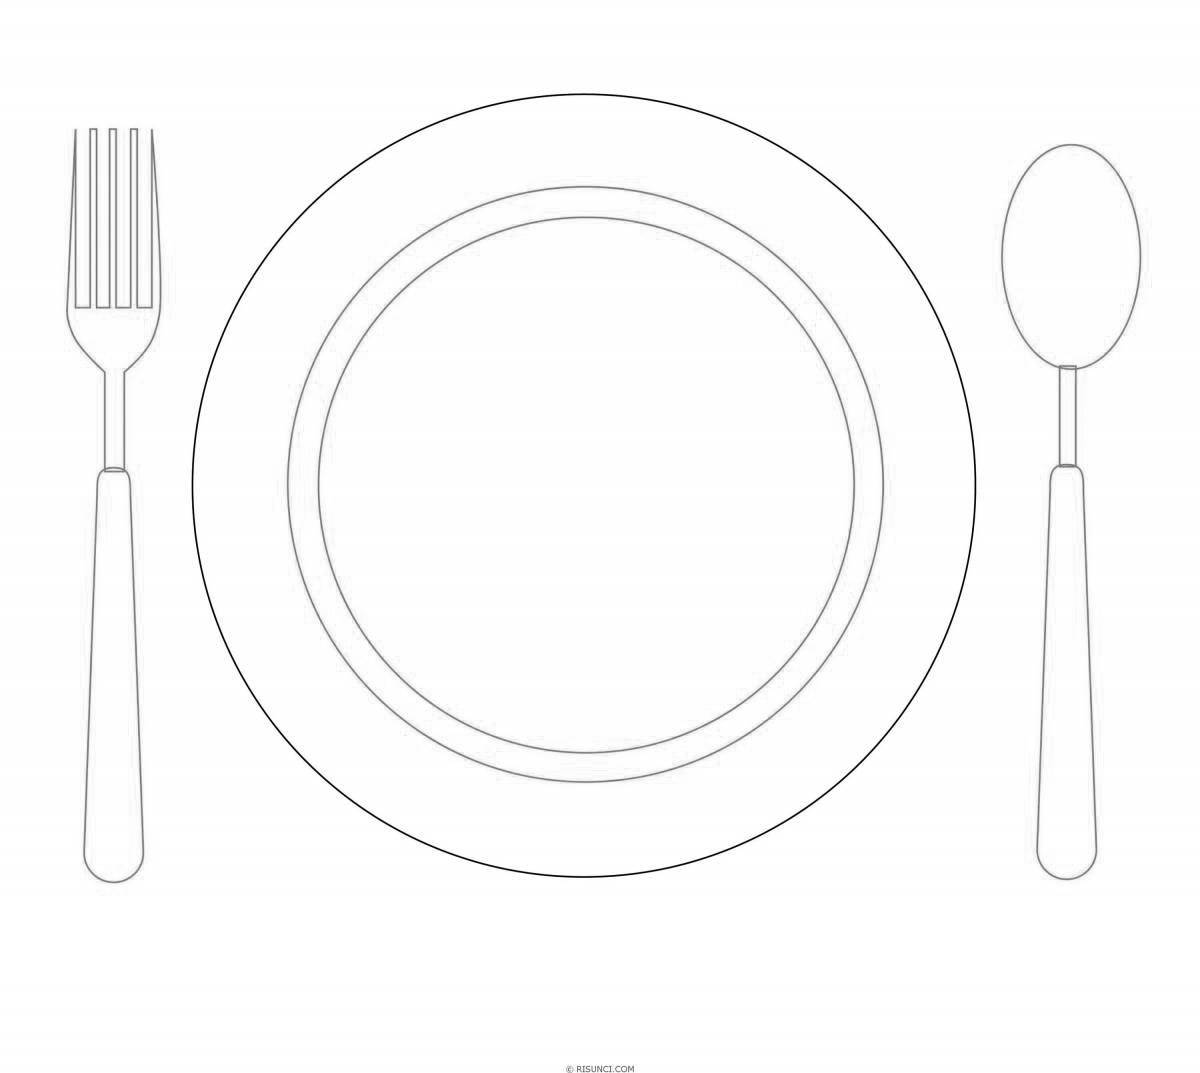 Creative table setting coloring book for kids